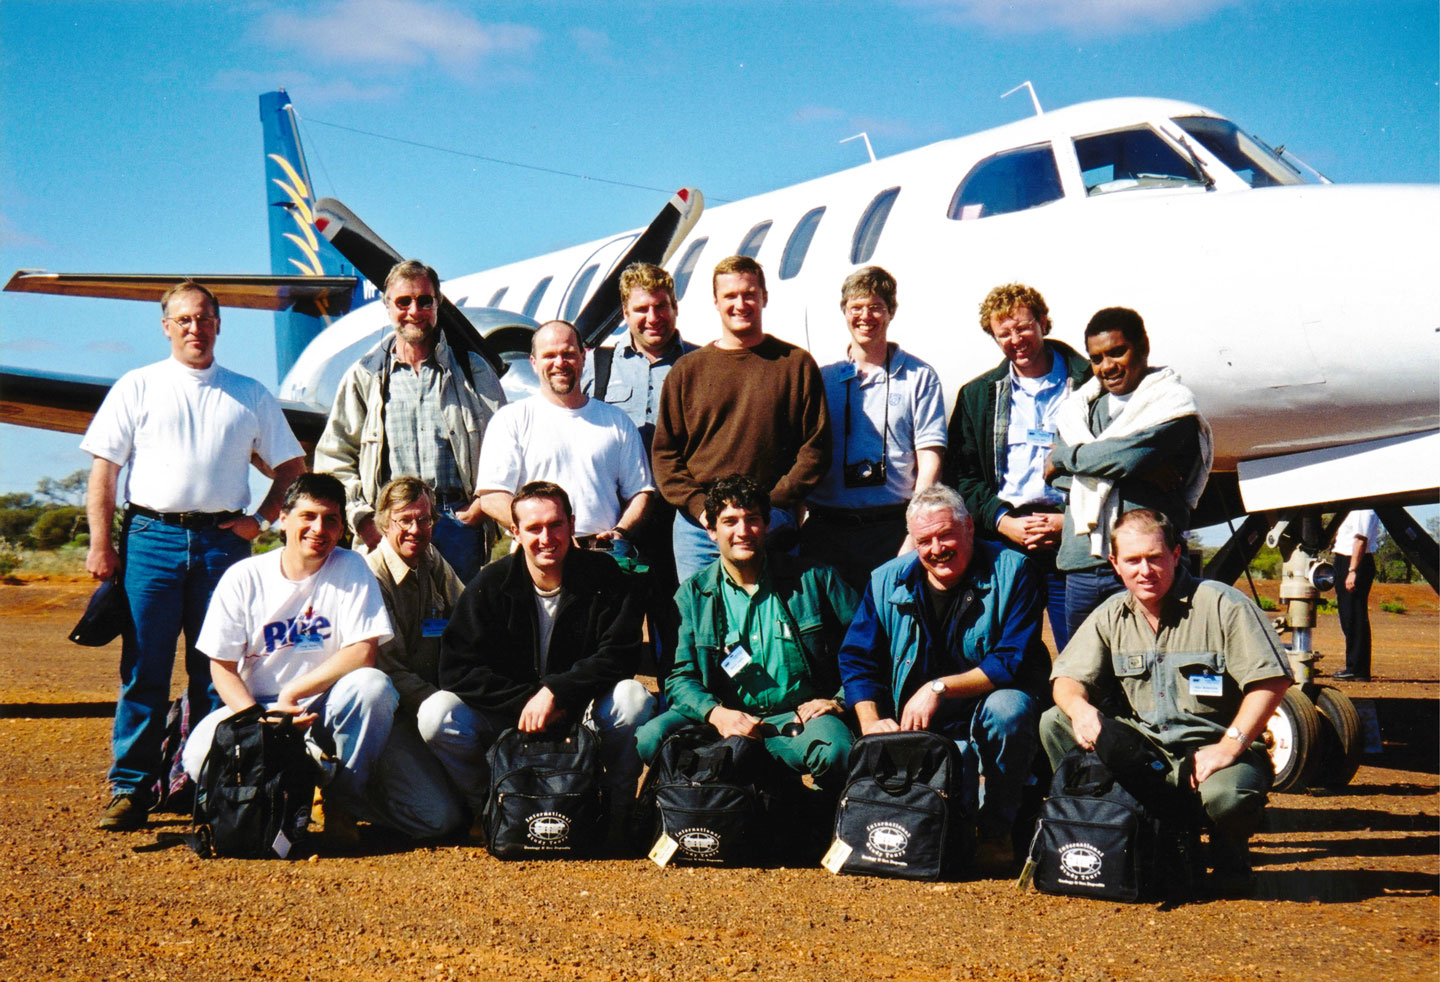 The Module 1A Group at Leinster, Australia